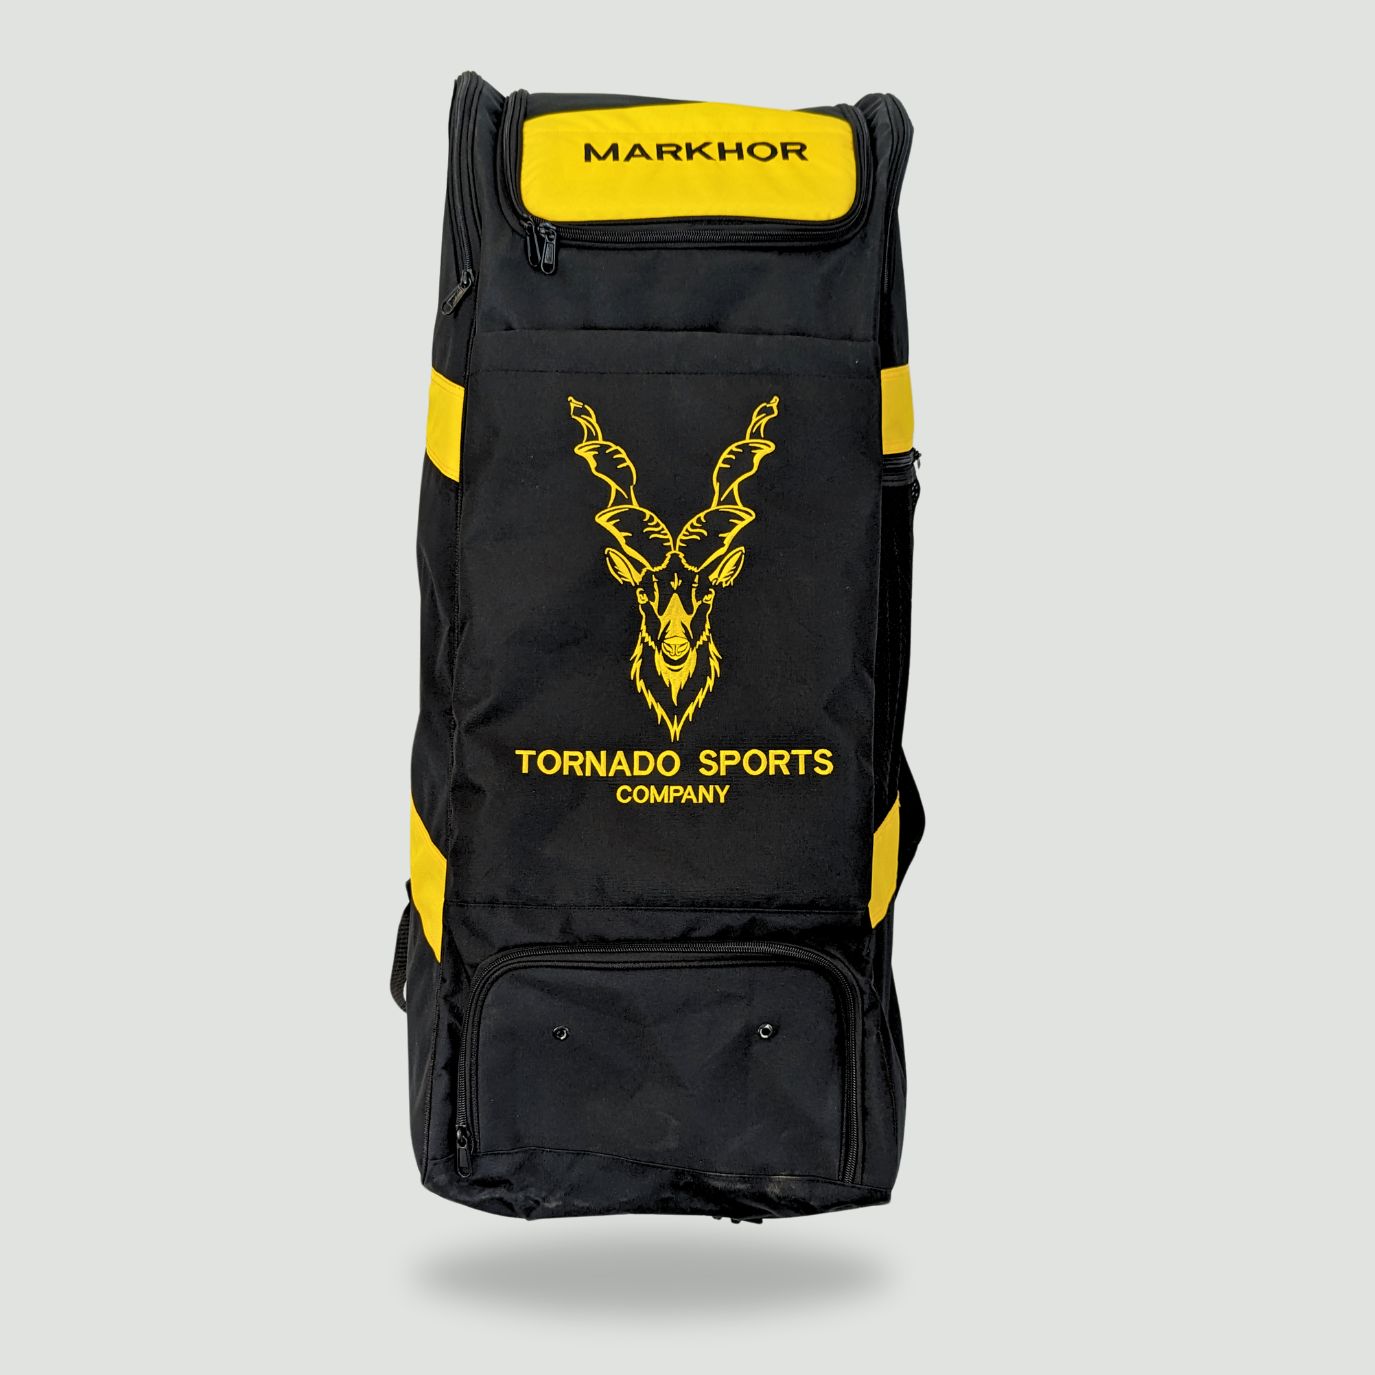 Cricket Kit Bag | Online Cricket Store in USA | Tornado Sports Company in USA